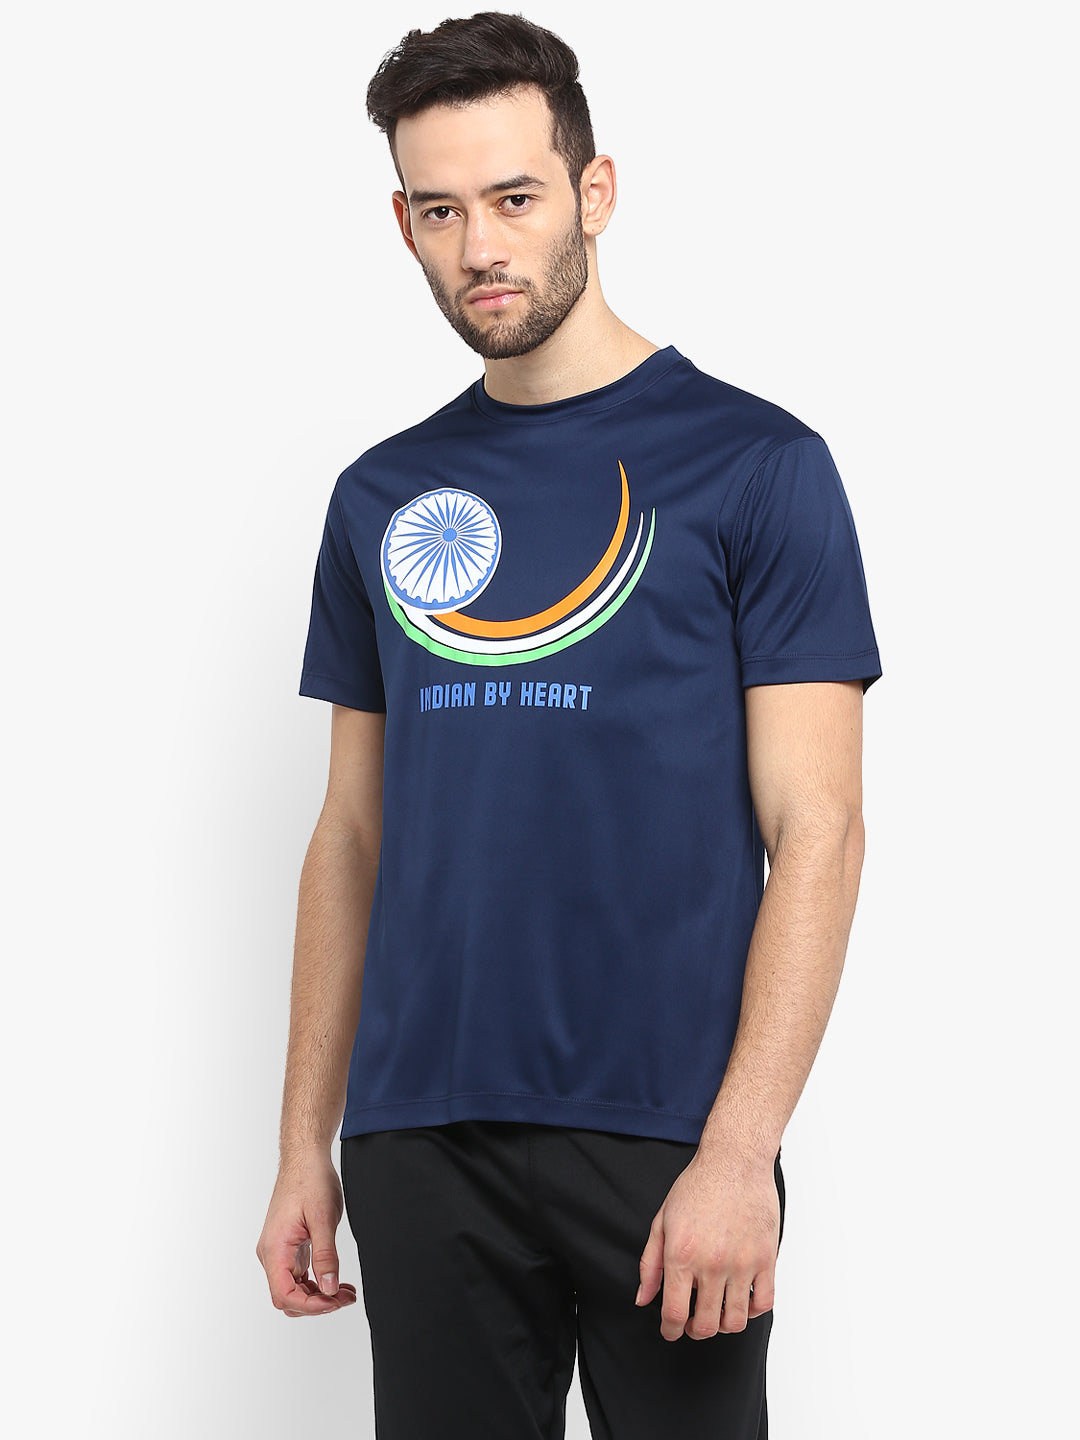 Shop INDIAN BY HEART TEE Online